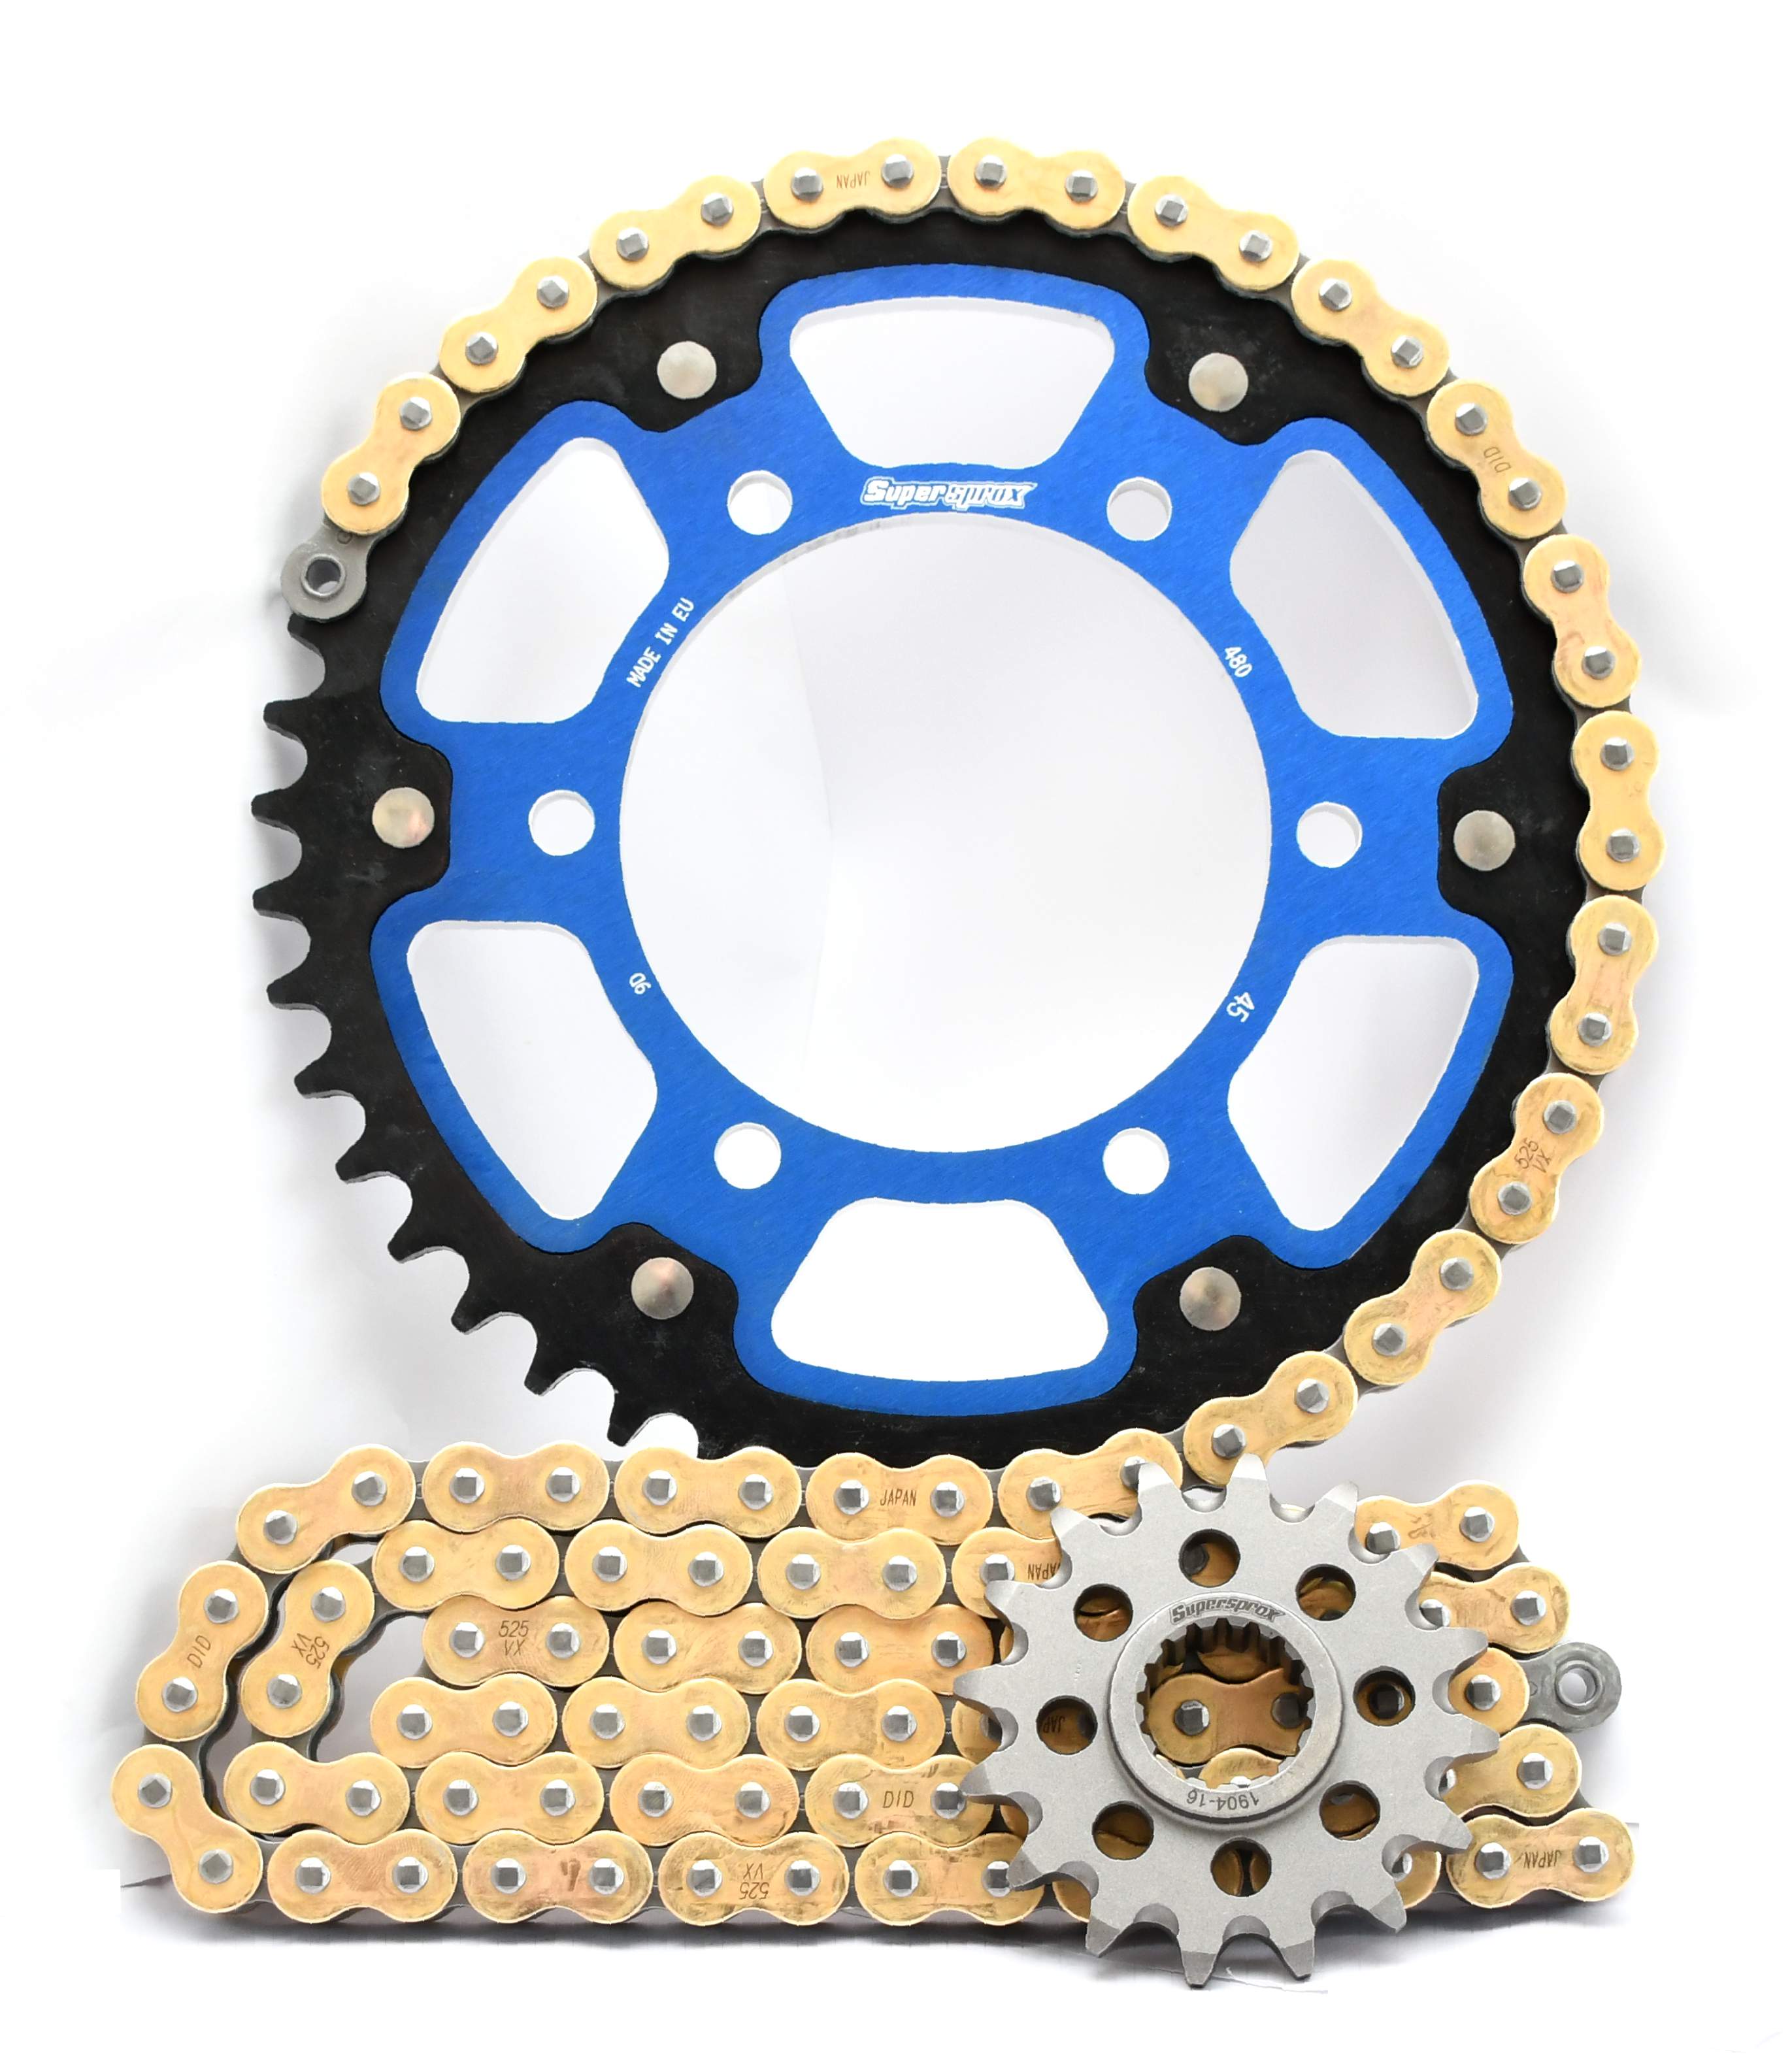 Supersprox Chain & Sprocket Kit for Yamaha MT-09 Tracer (Inc GT) 18-20 - Standard Gearing